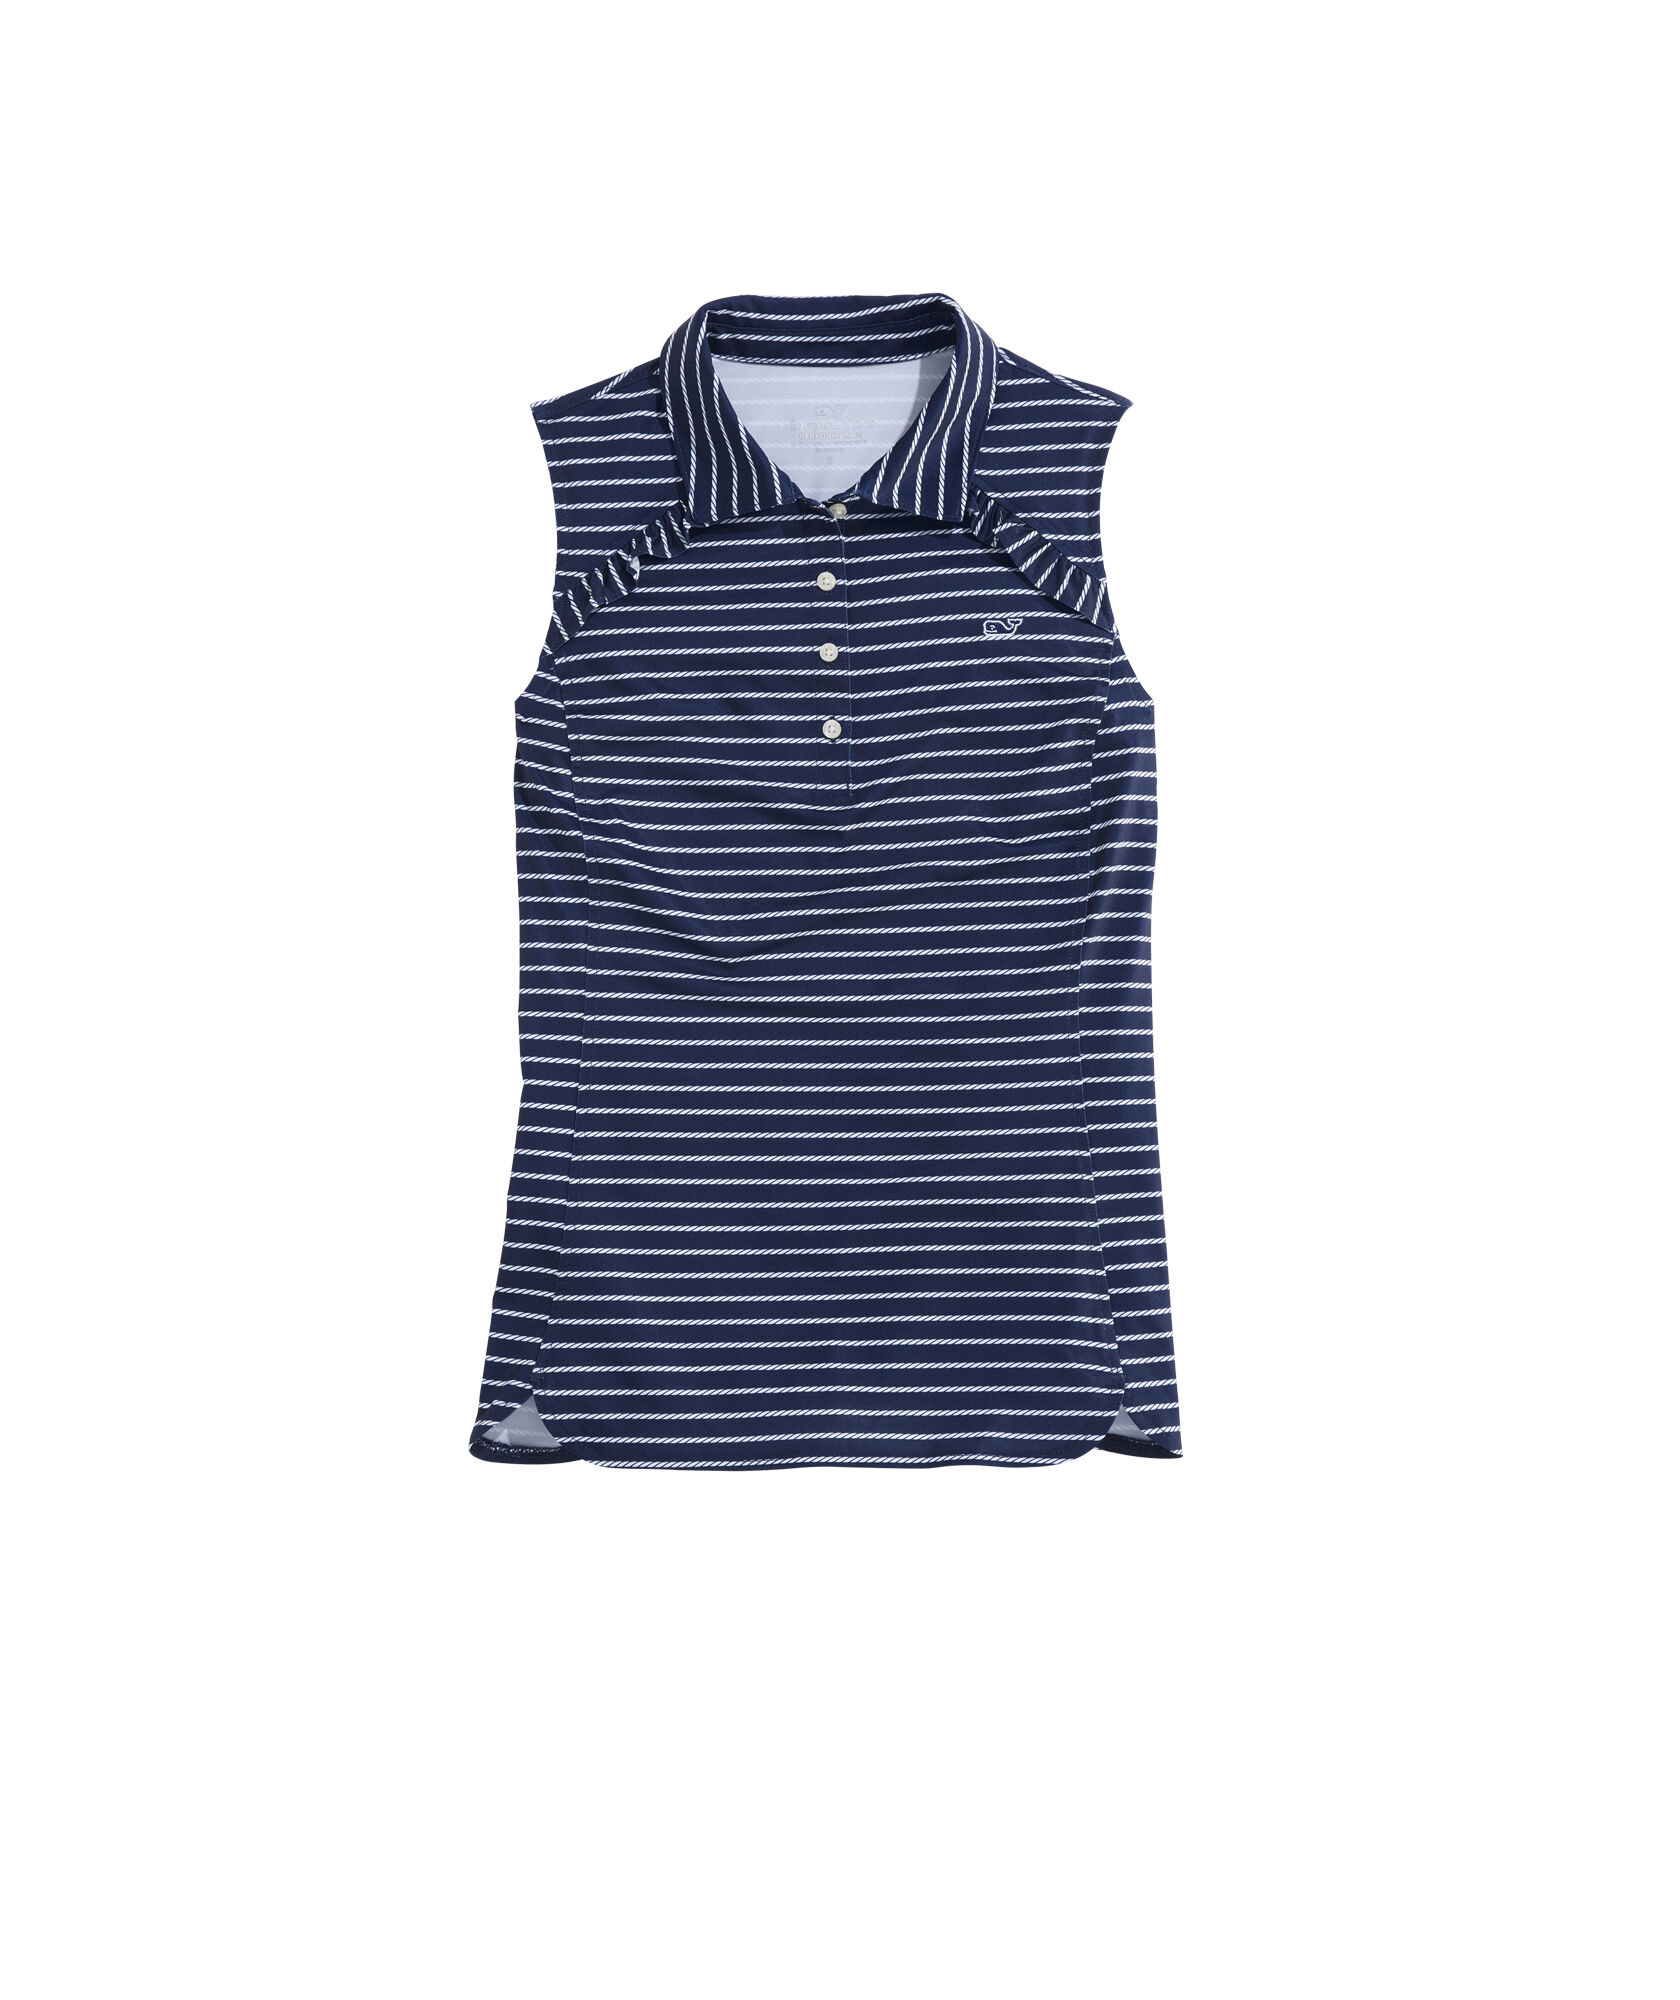 OUTLET Printed Sleeveless Performance Ruffle Polo